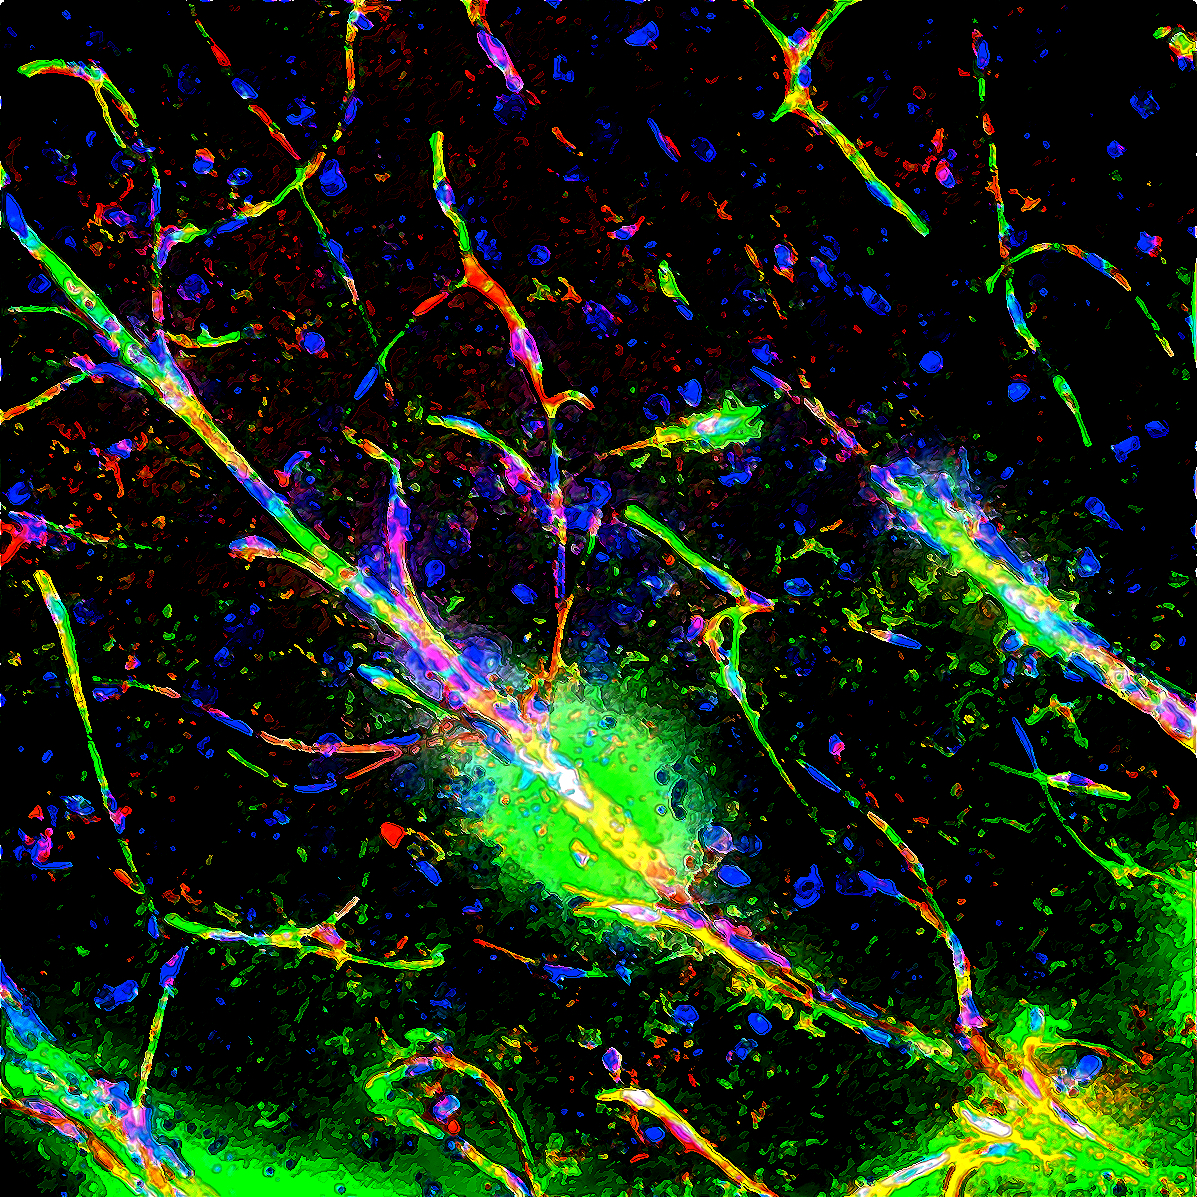 A microscopic image of a neuron labeled in fluorescent colorful markers